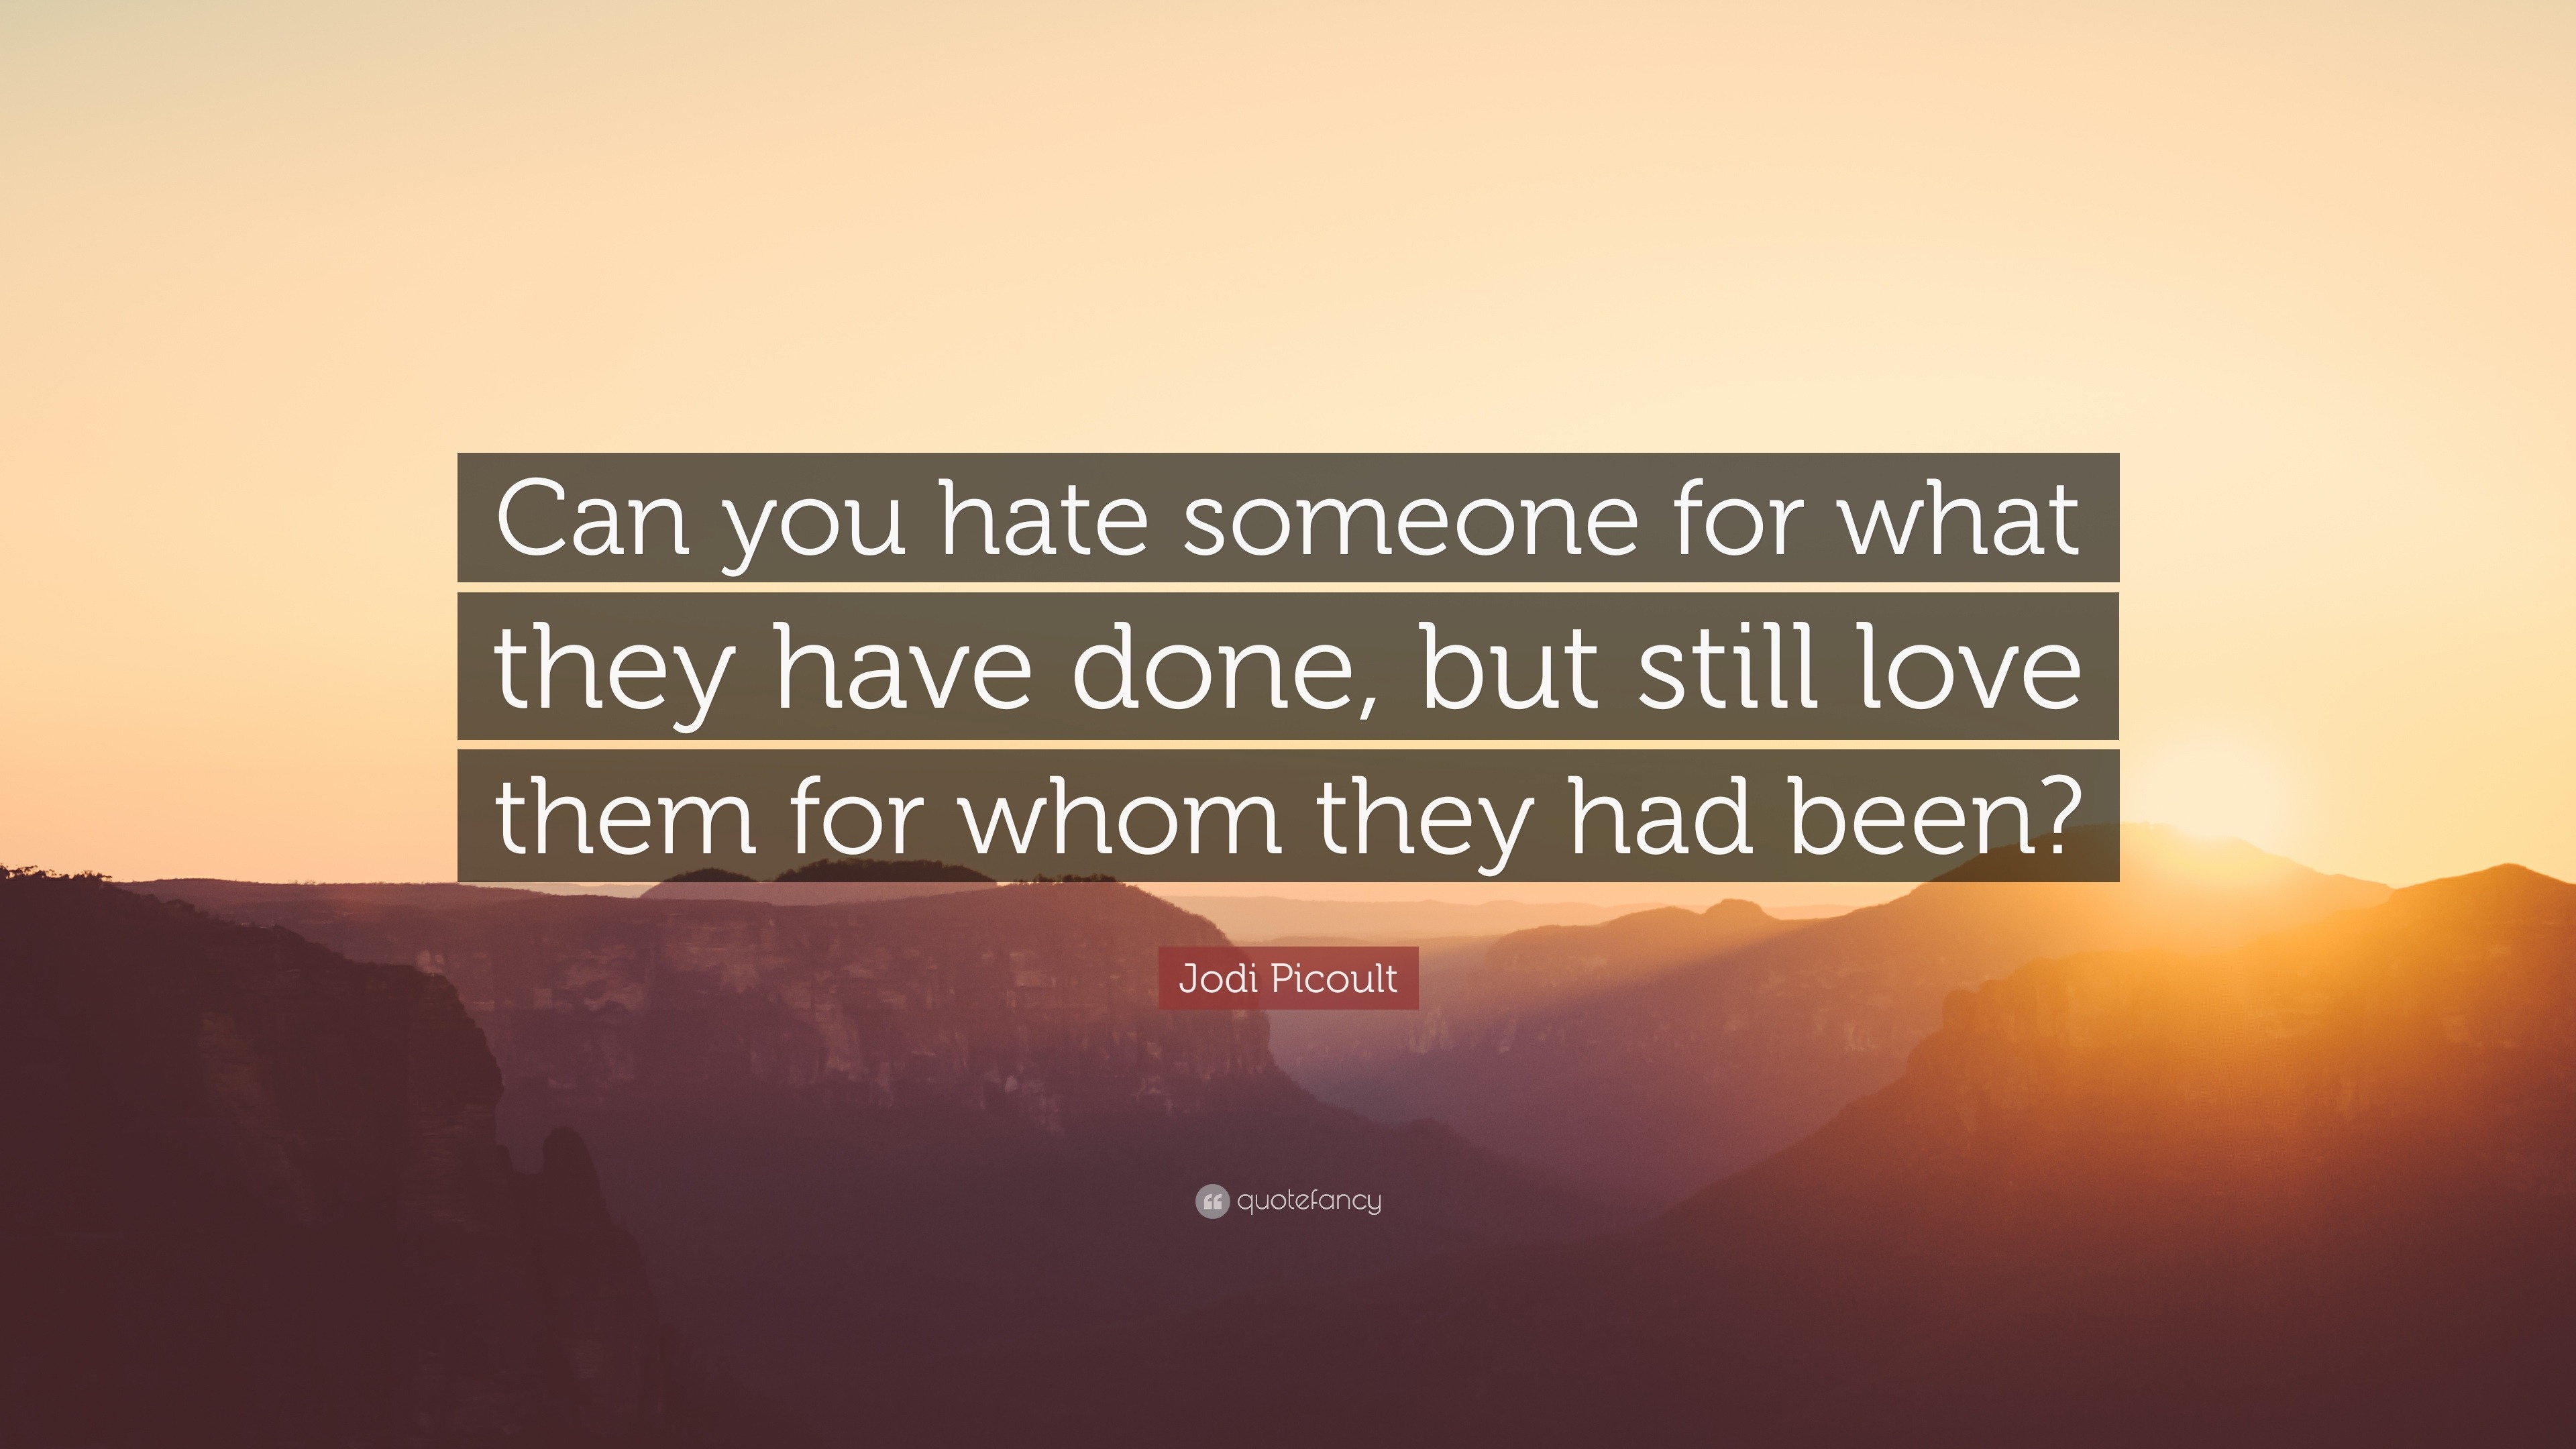 Jodi Picoult Quote “Can you hate someone for what they have done but